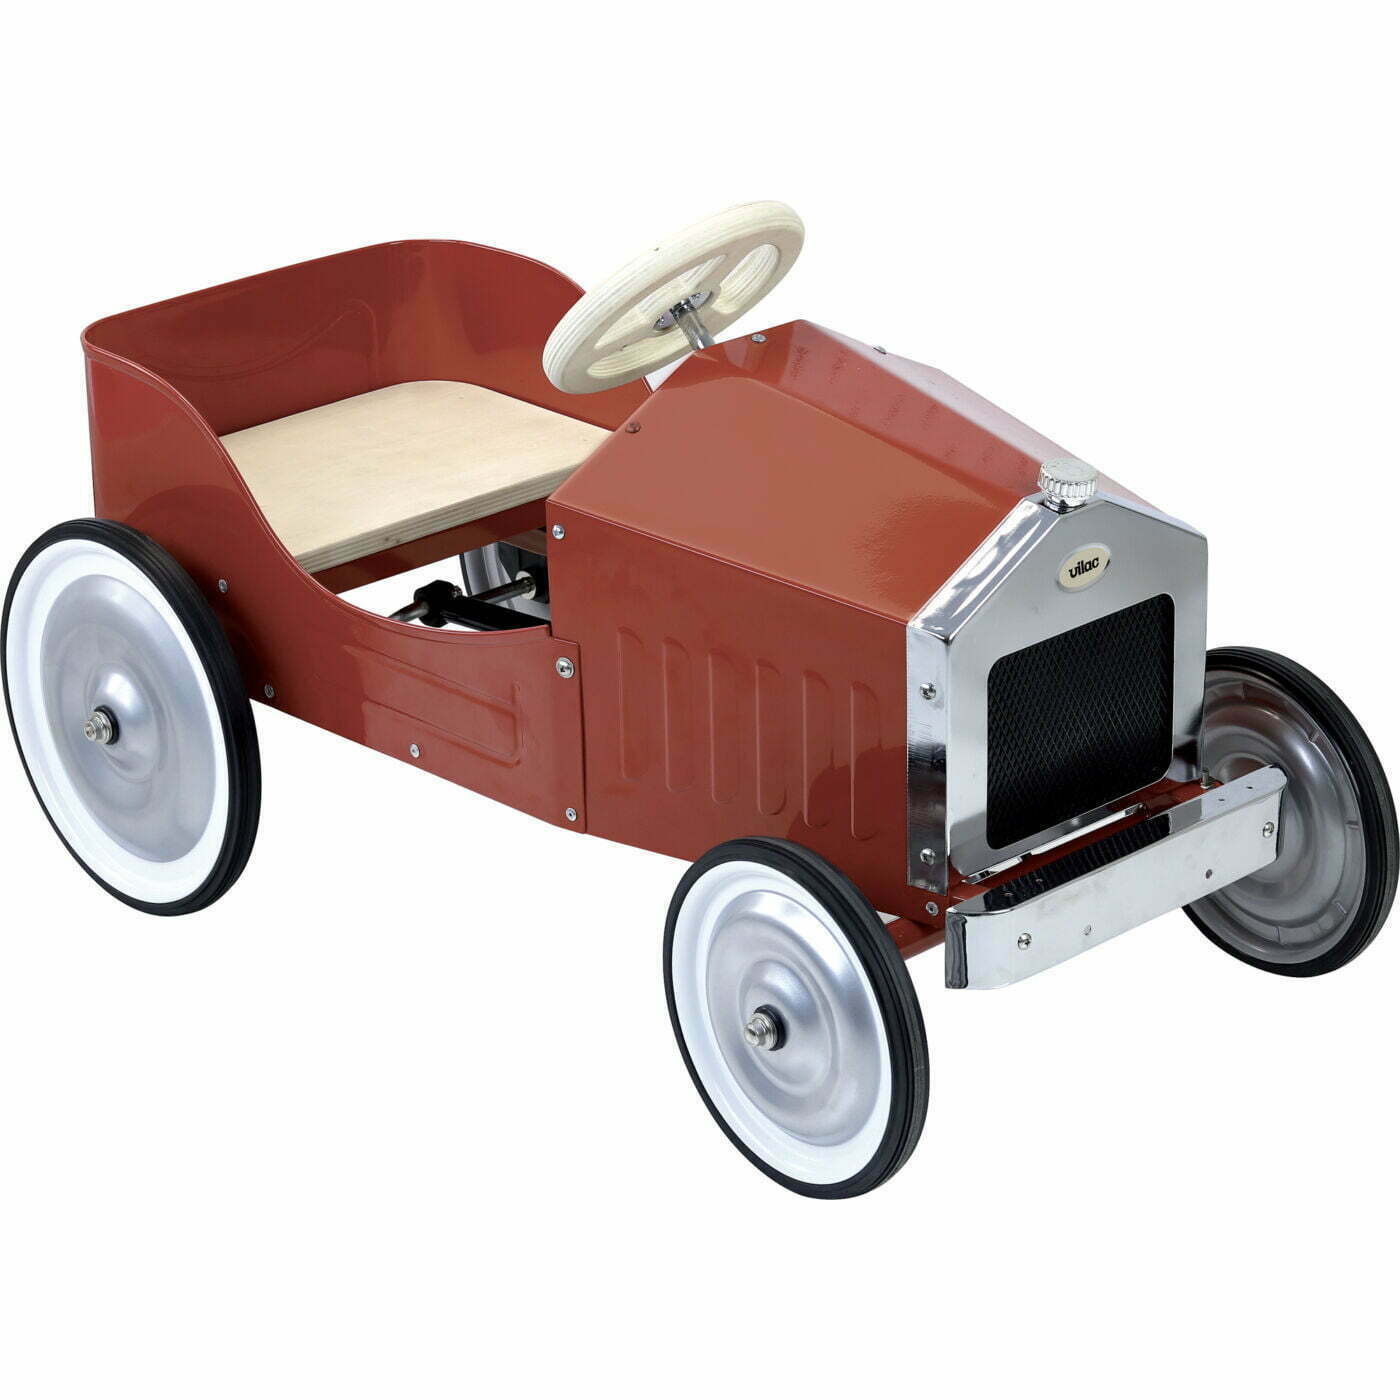 large red pedal car by vilac best pedal car for kids review